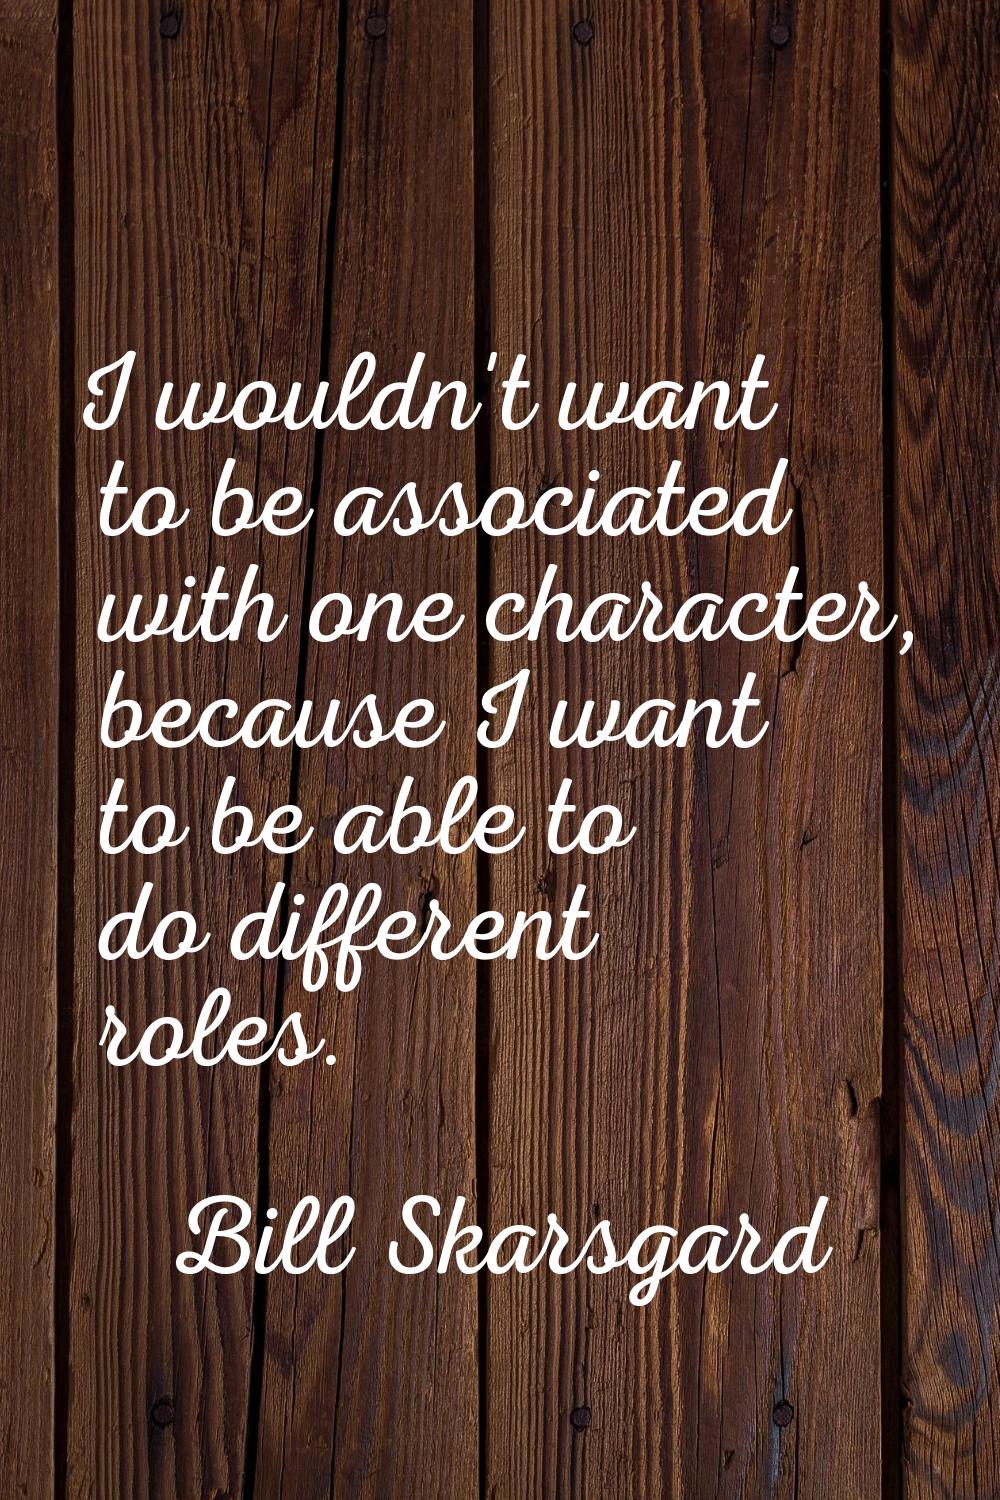 I wouldn't want to be associated with one character, because I want to be able to do different role